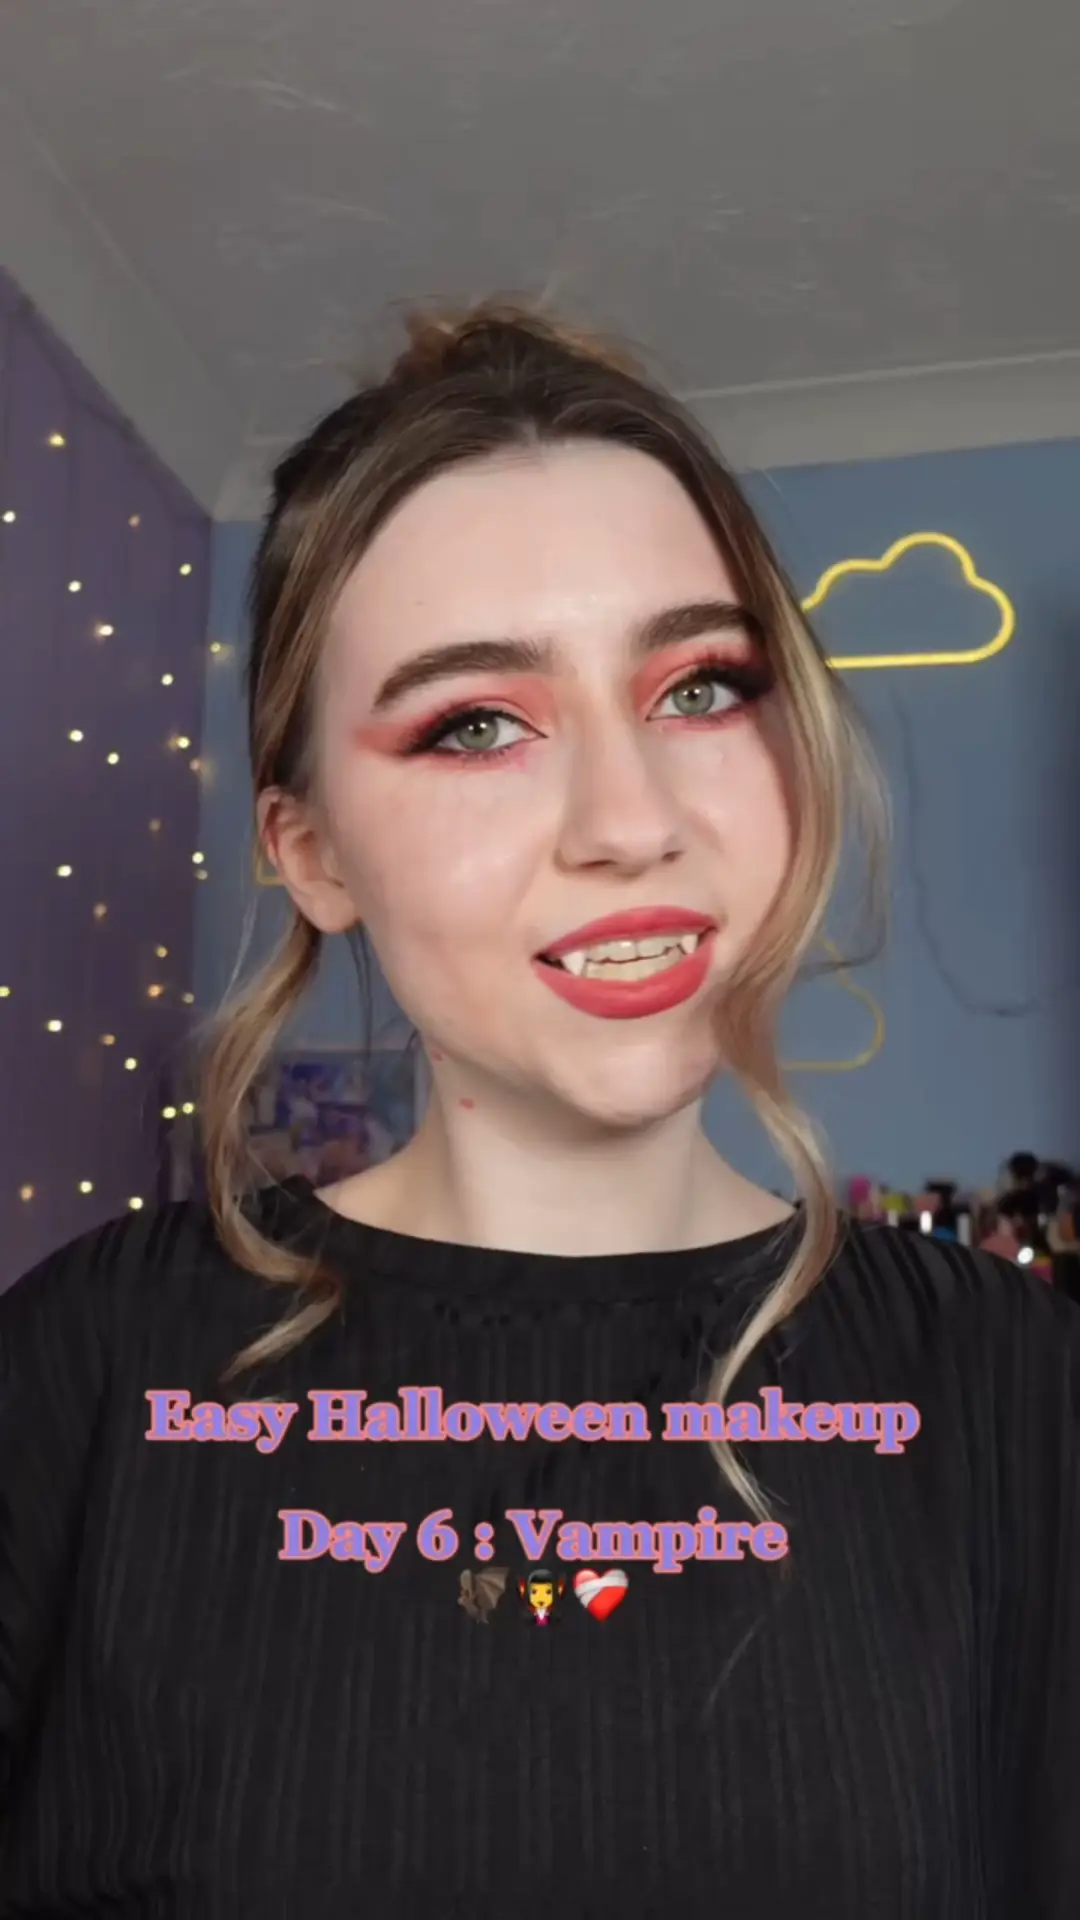 Liquid Latex Tutorial for Halloween, Video published by Katelynn 💗